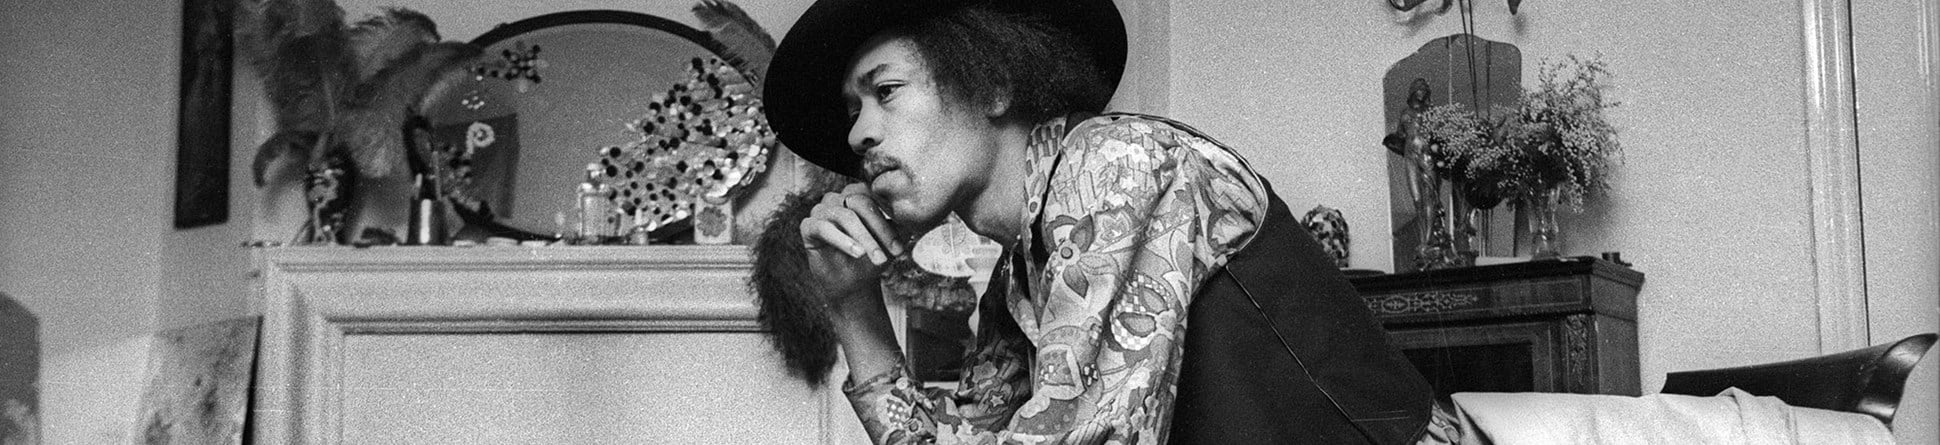 Jimi Hendrix in his apartment at number 23 Brook Street, London